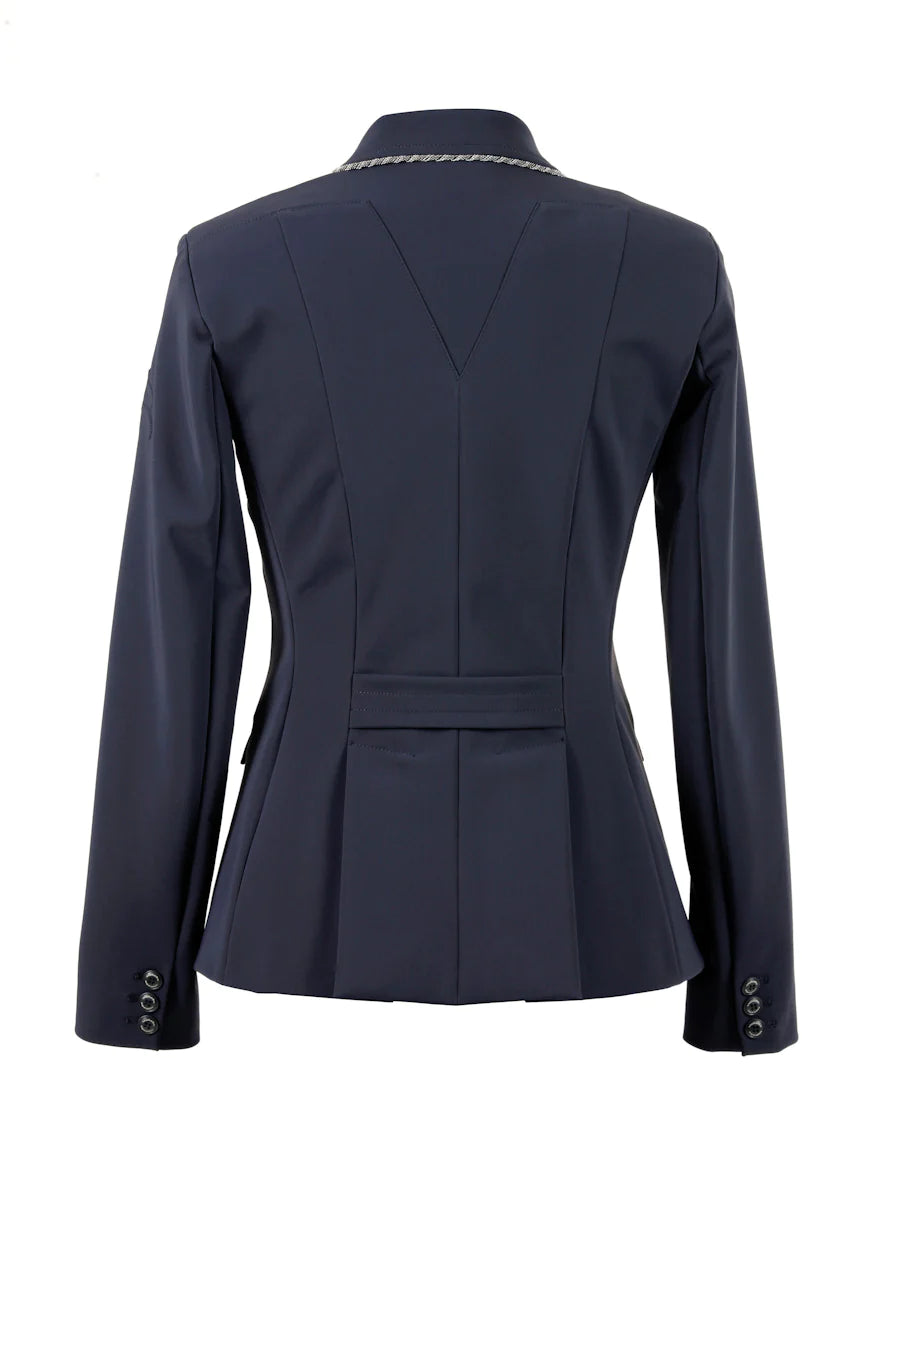 MAKEBE - CINDY Show Jacket with GOLD Piping